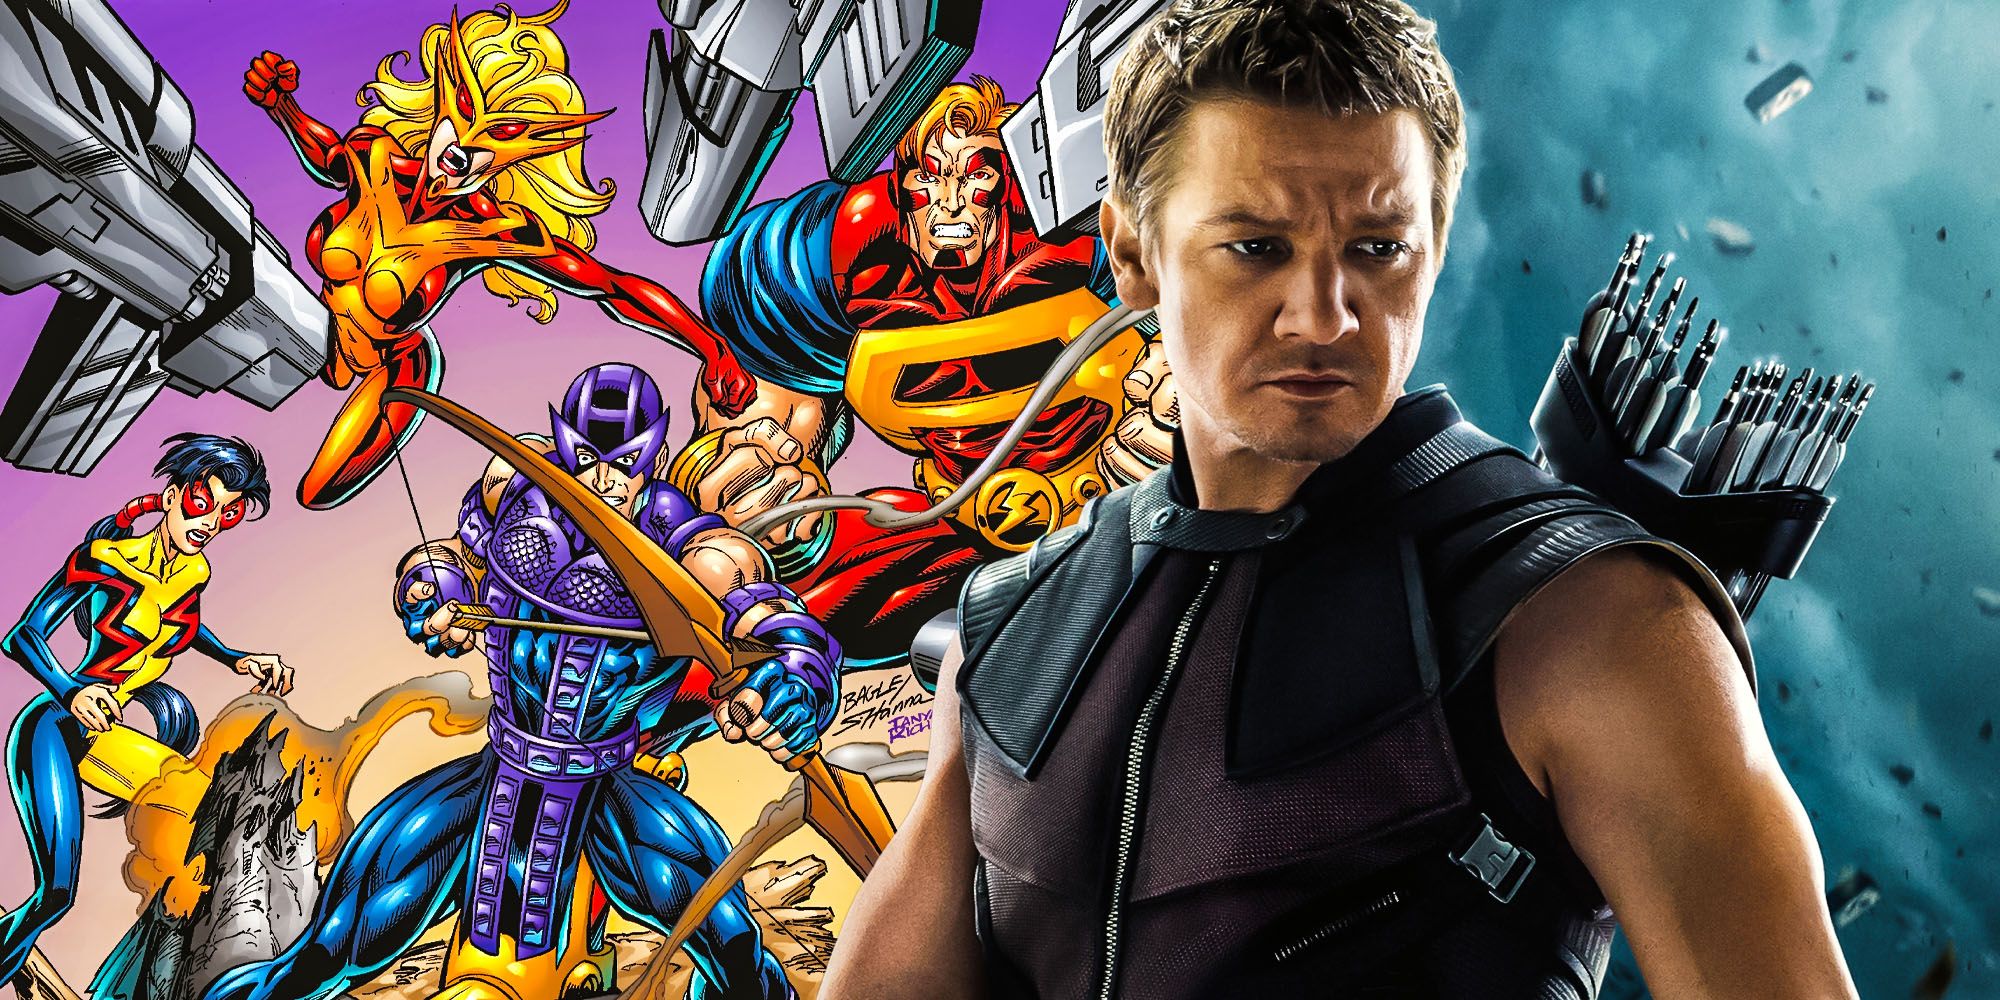 MCU Thunderbolts could be a Hawkeye secret movie jeremy renner